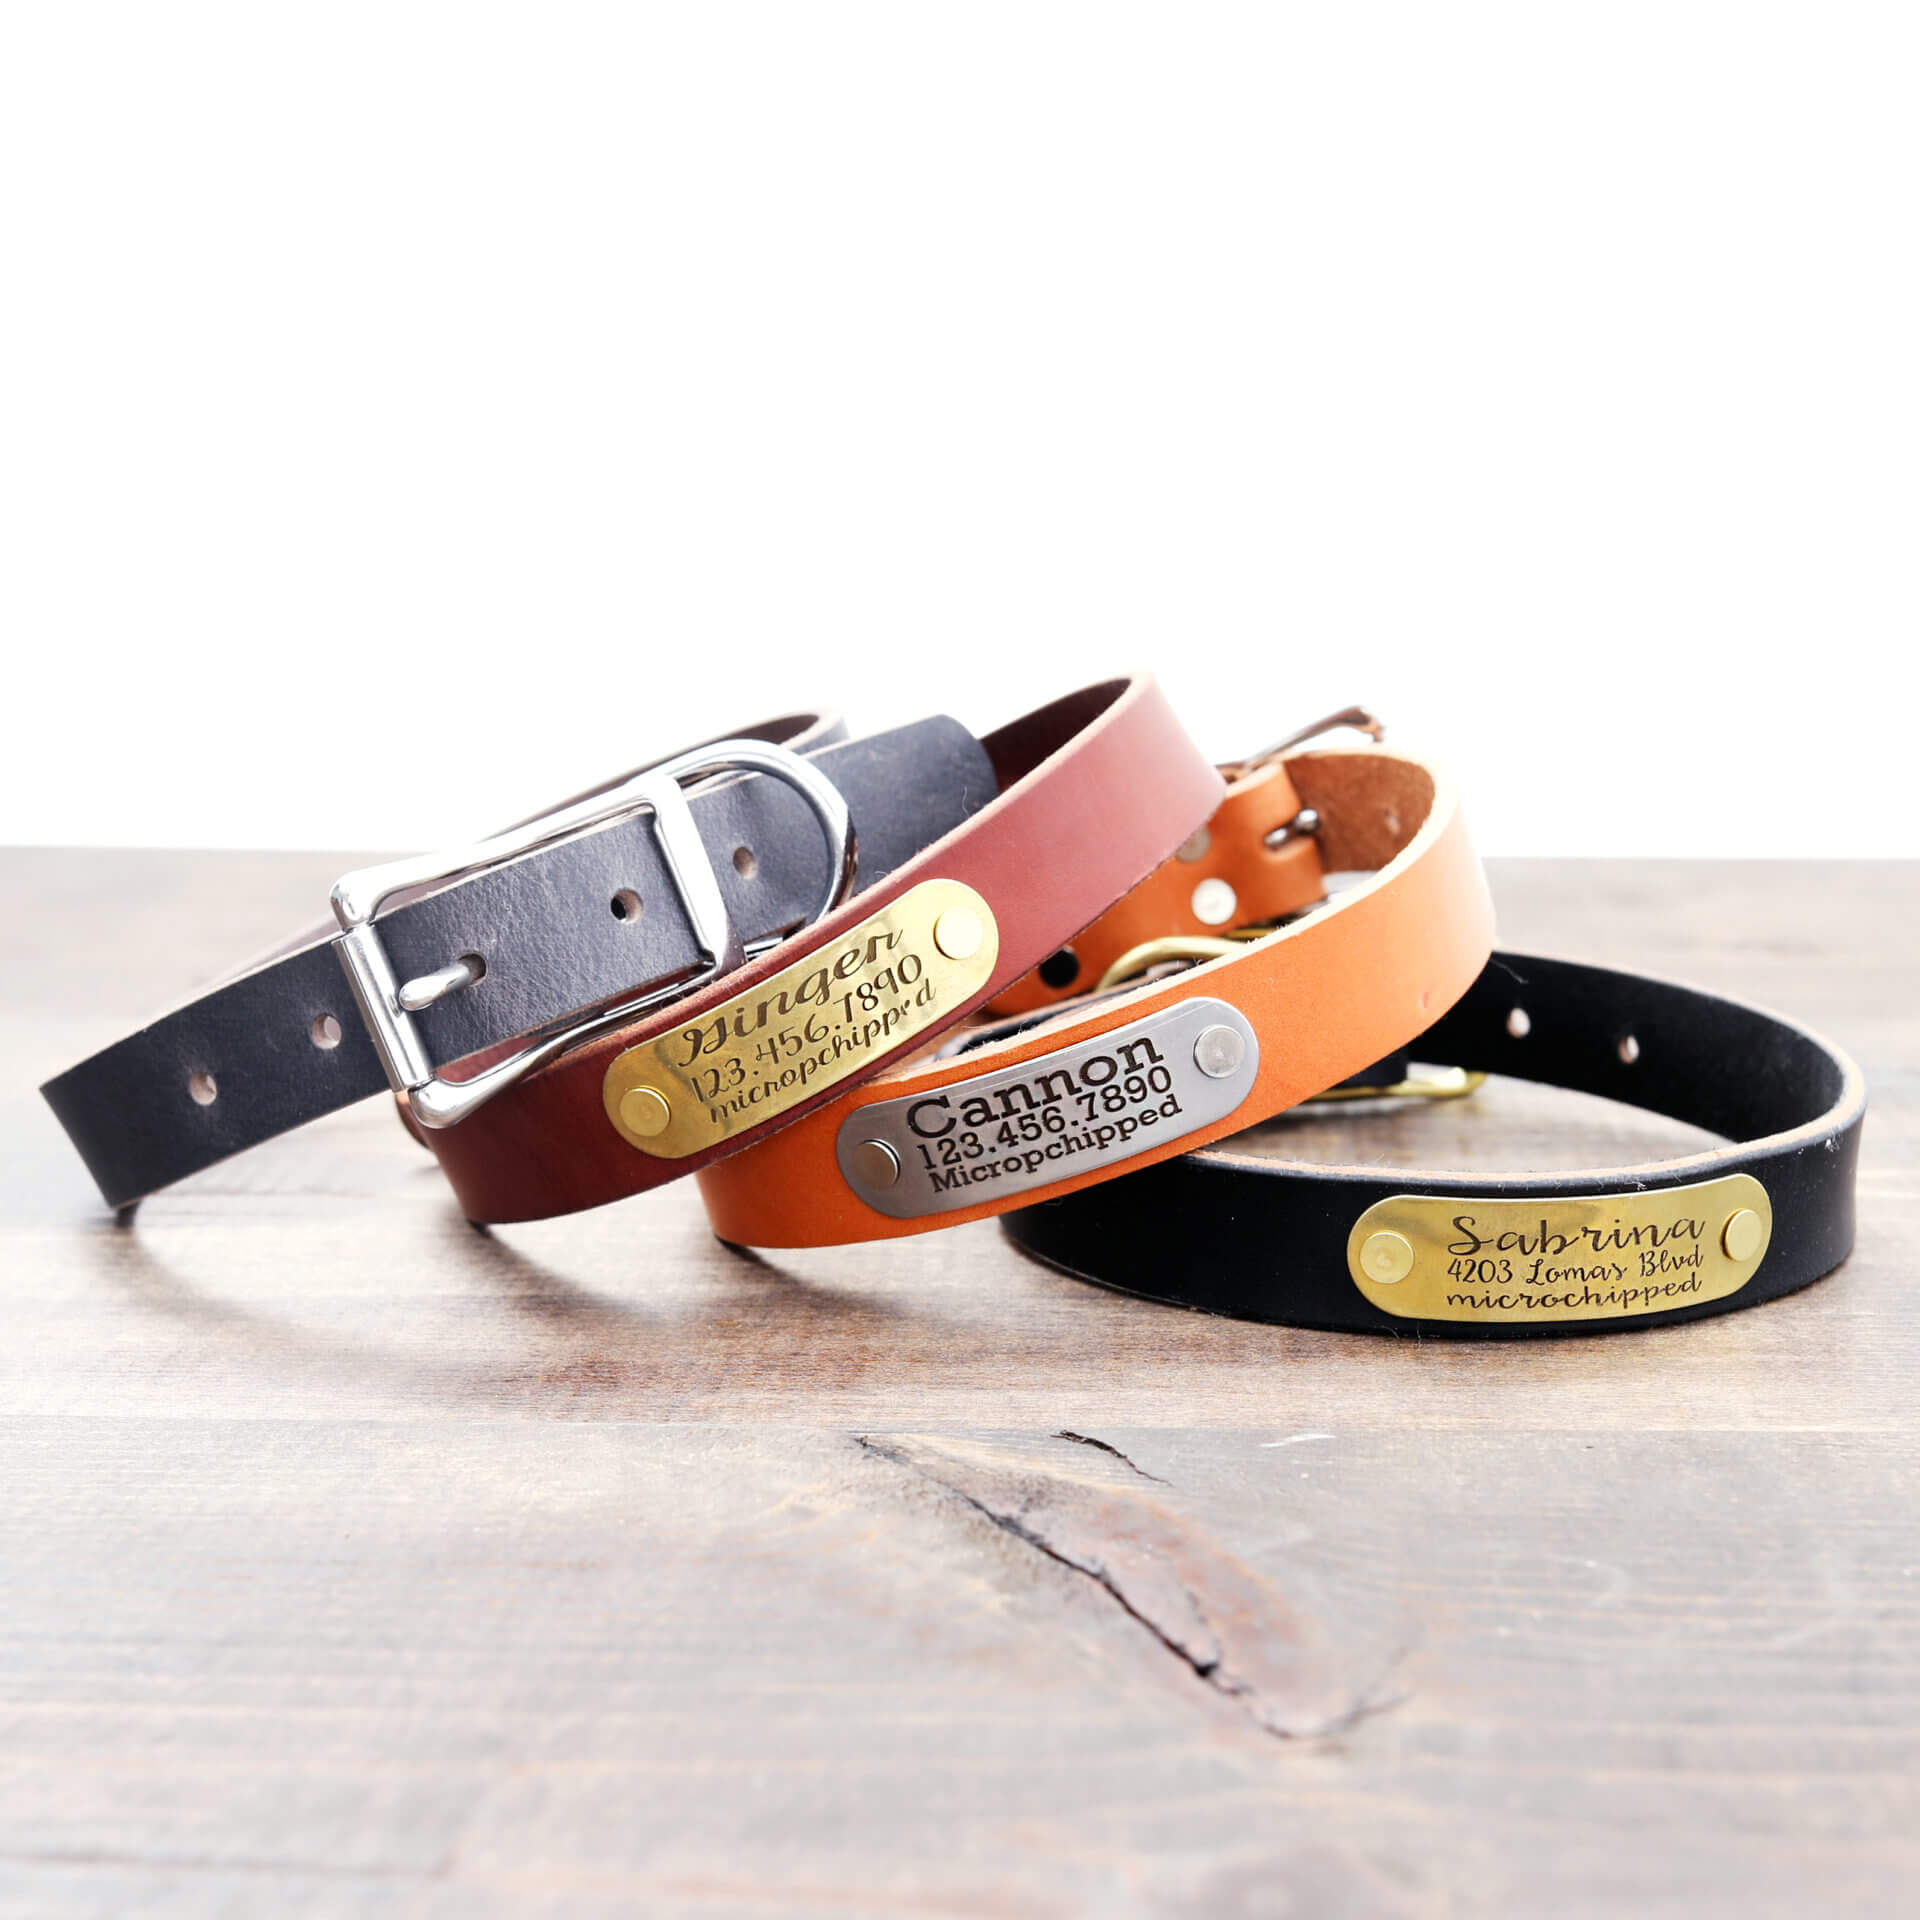 Personalized Dog Collar - Custom Engraved with Soft Leather - Small Medium  or Large Size with Name Plate (X-Small, Brown)